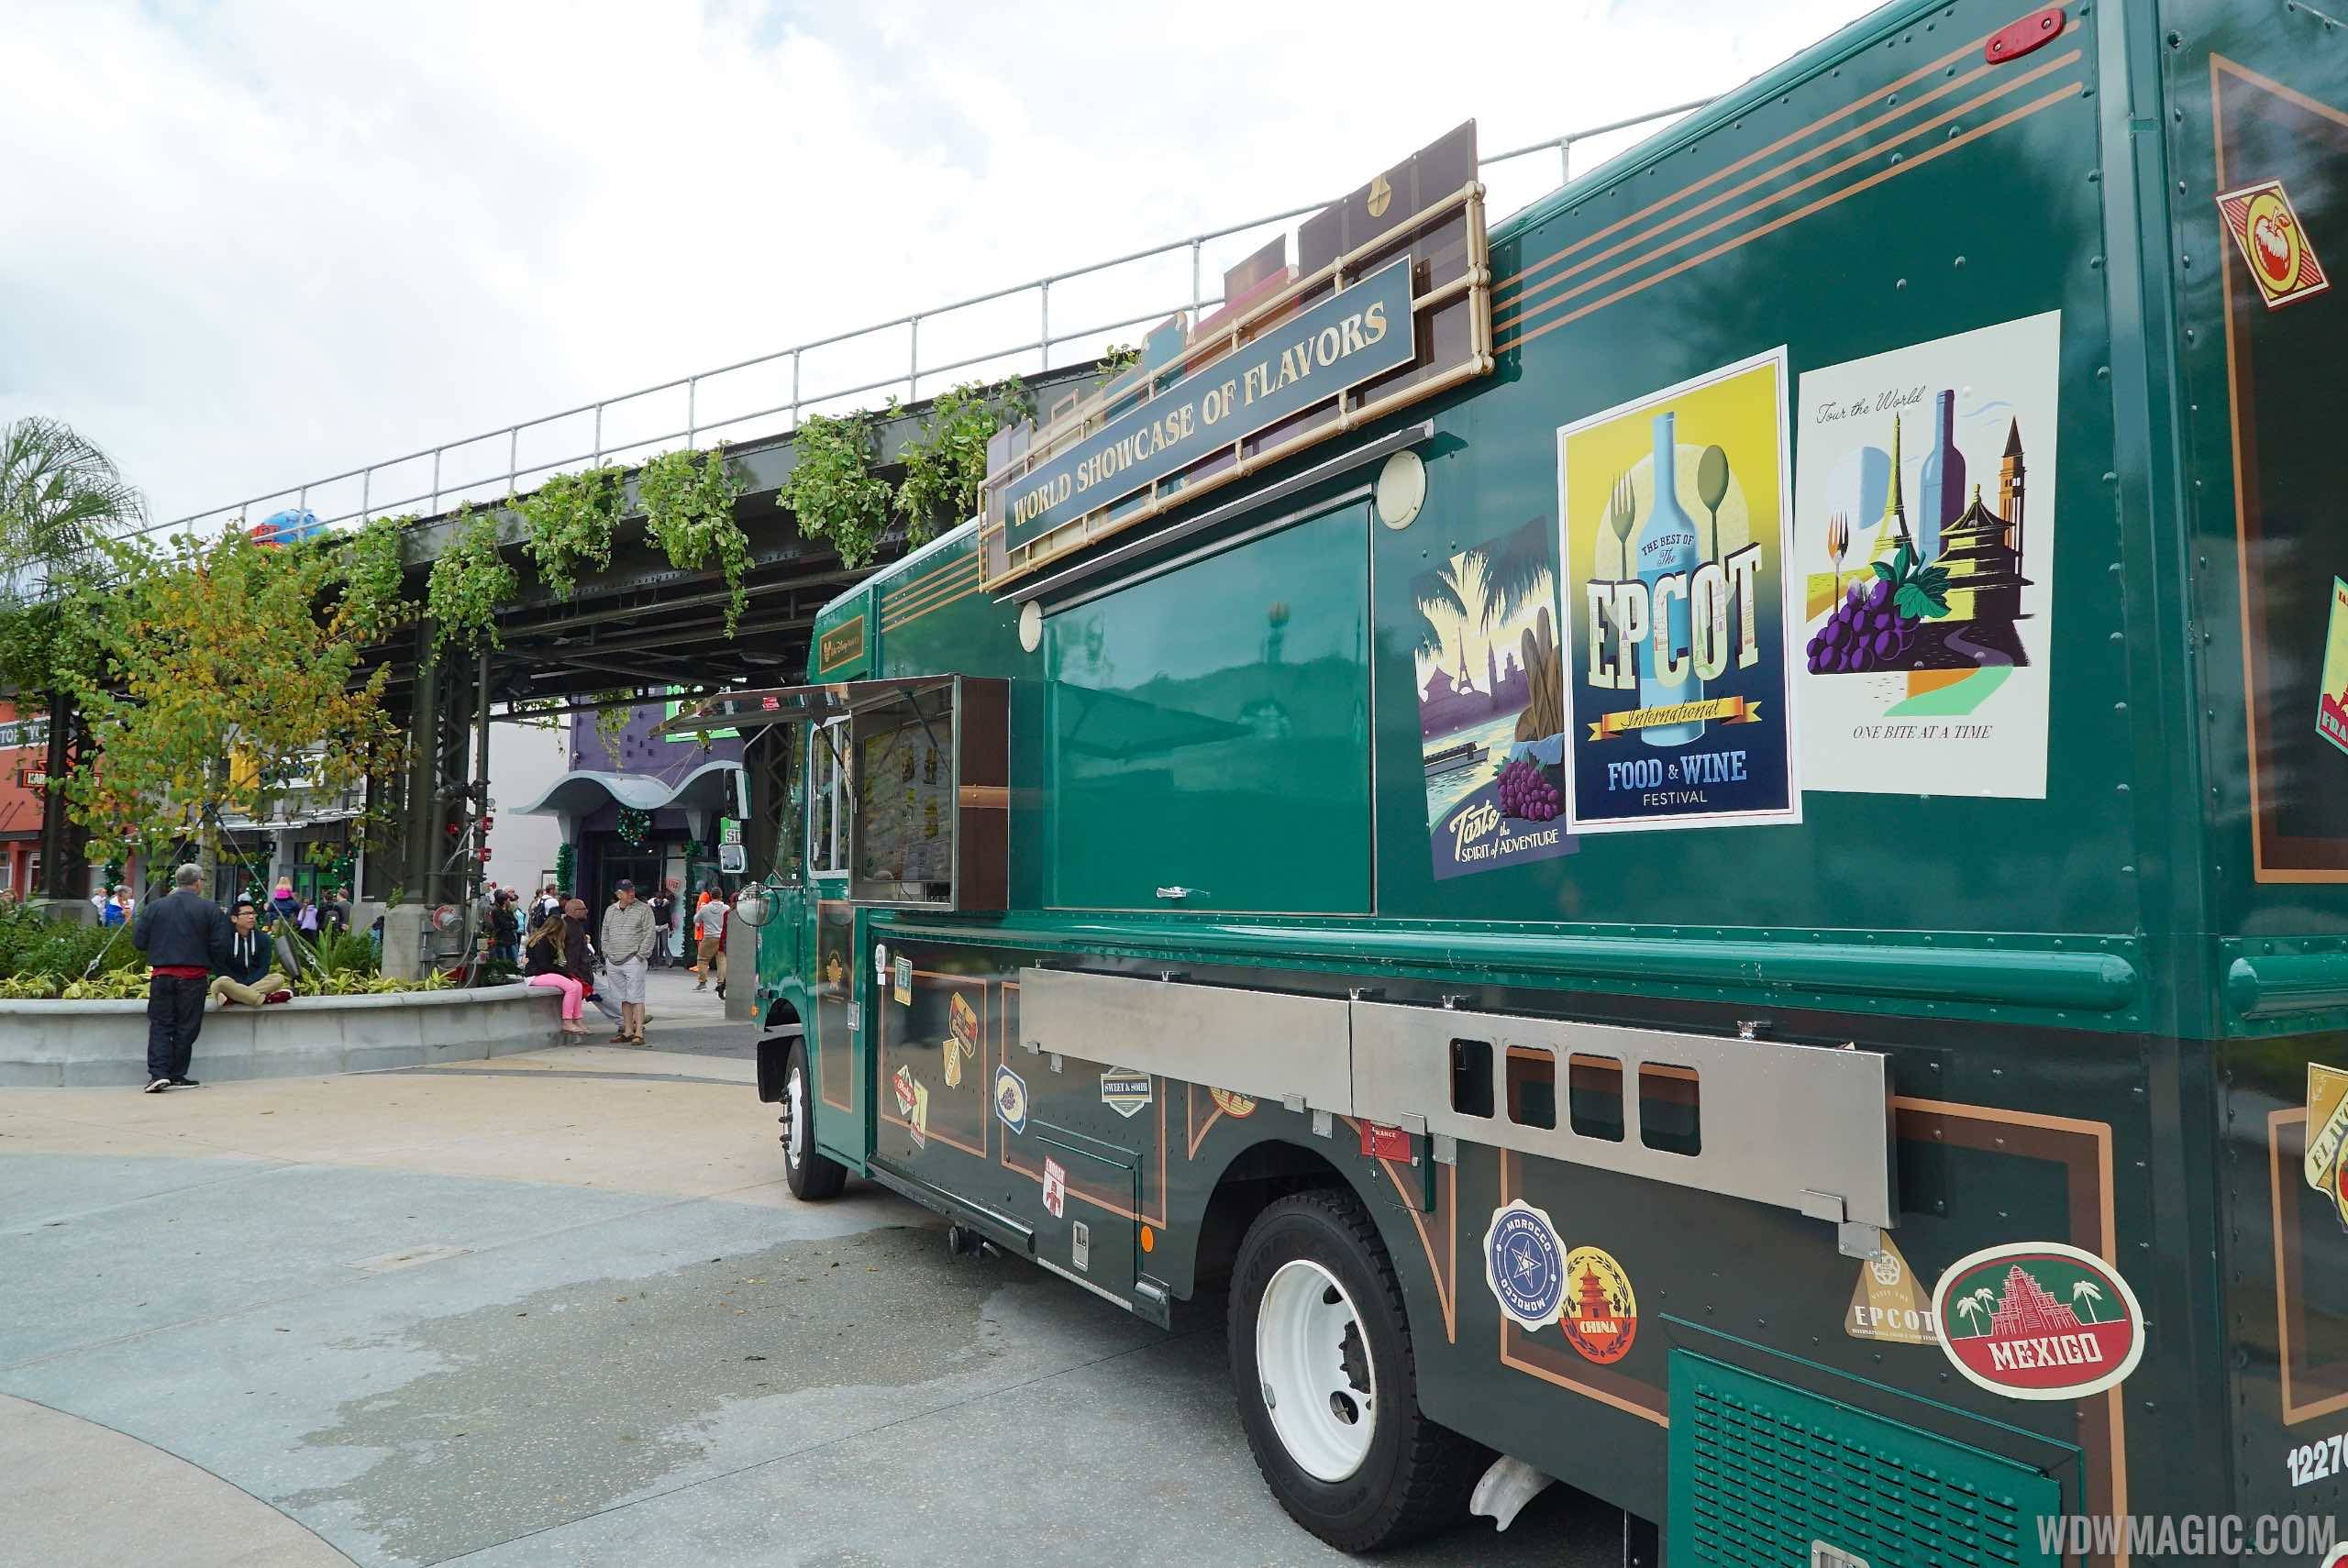 Walt Disney World plans to close its Disney operated food trucks including locations at Disney Springs